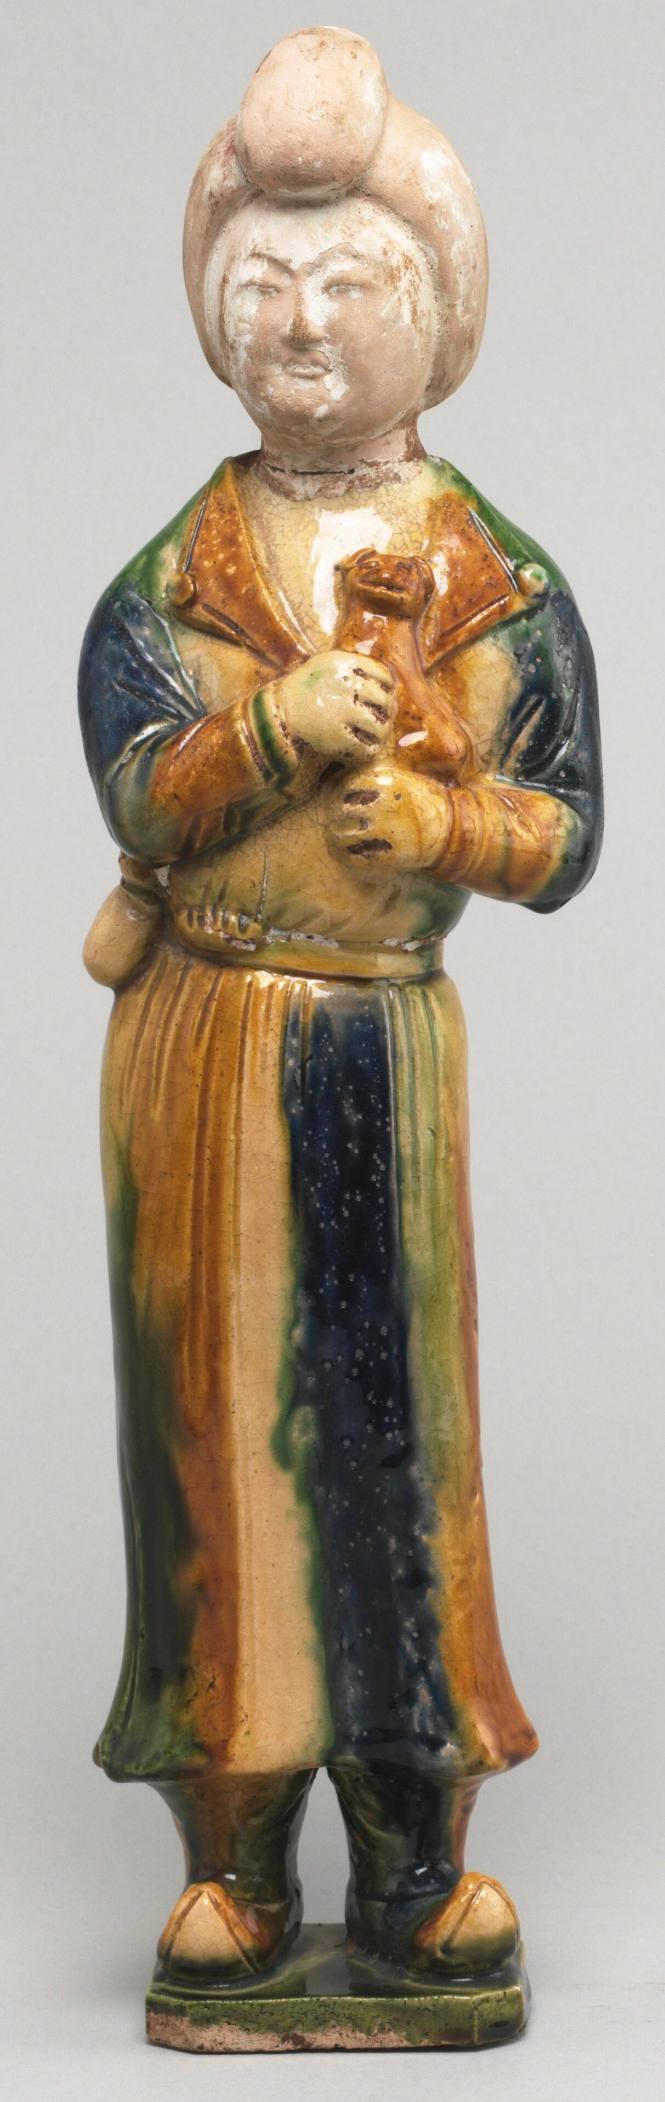 Tang style Chinese figure attendant standing holding a dog